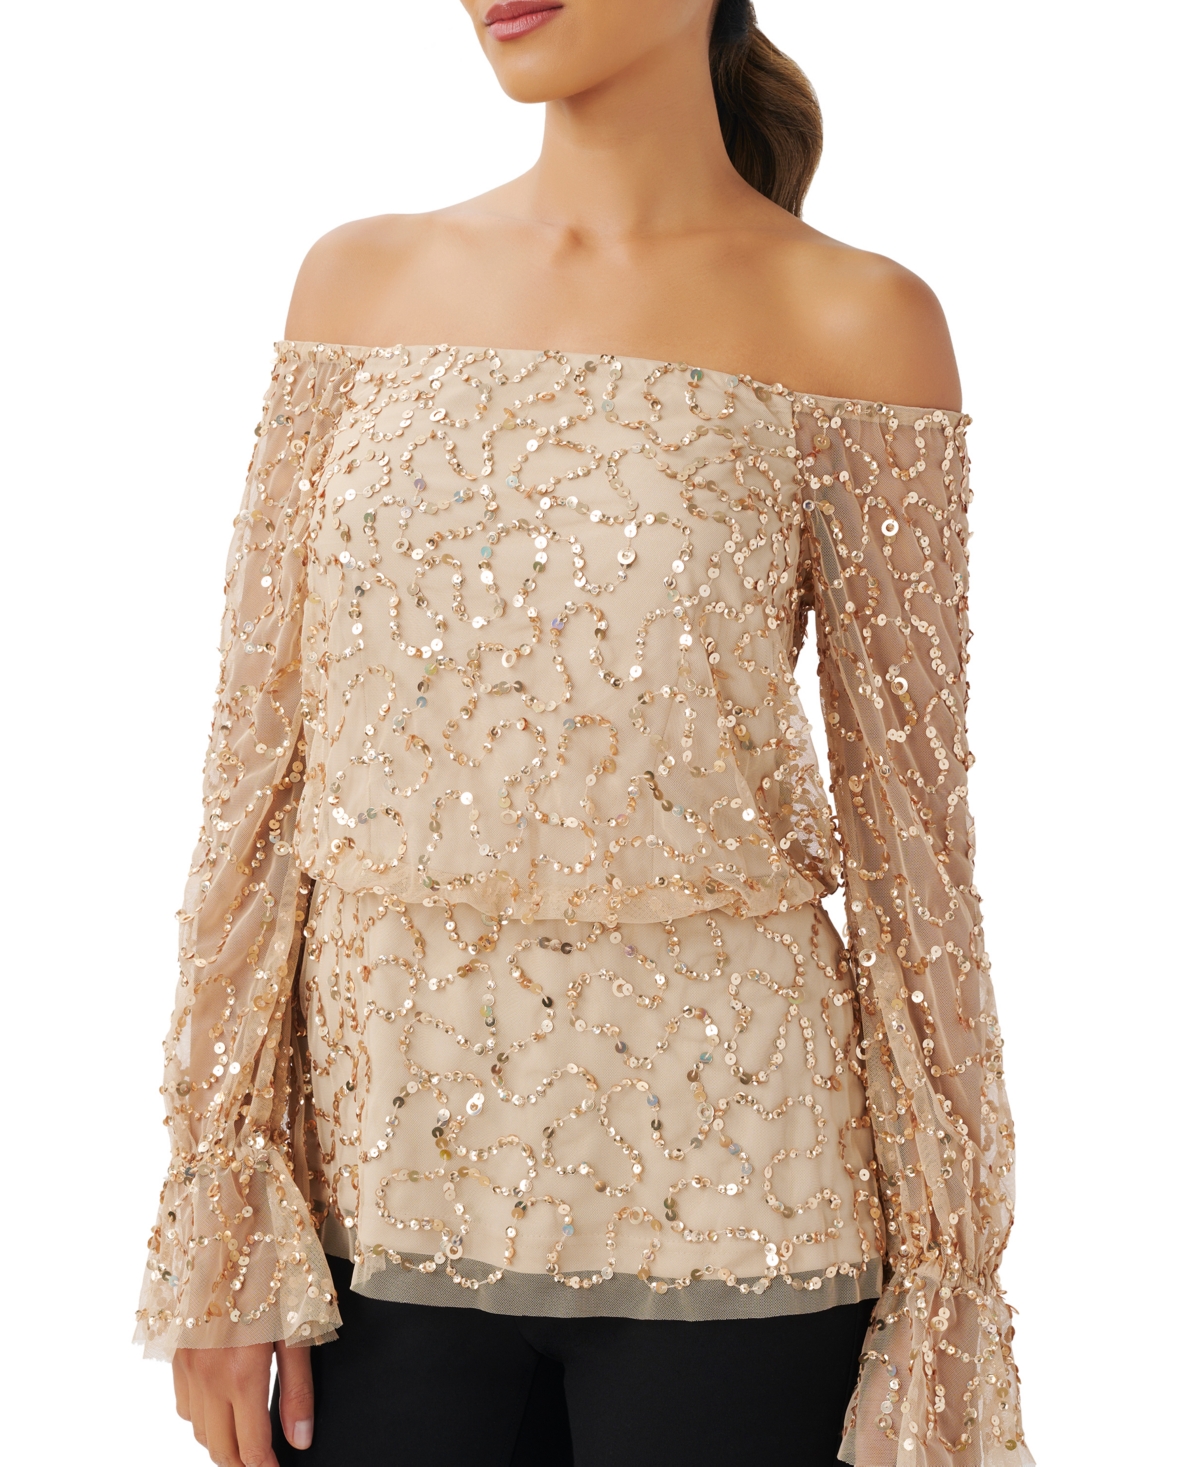  Adrianna Papell Women's Beaded Off-The-Shoulder Long-Sleeve Top